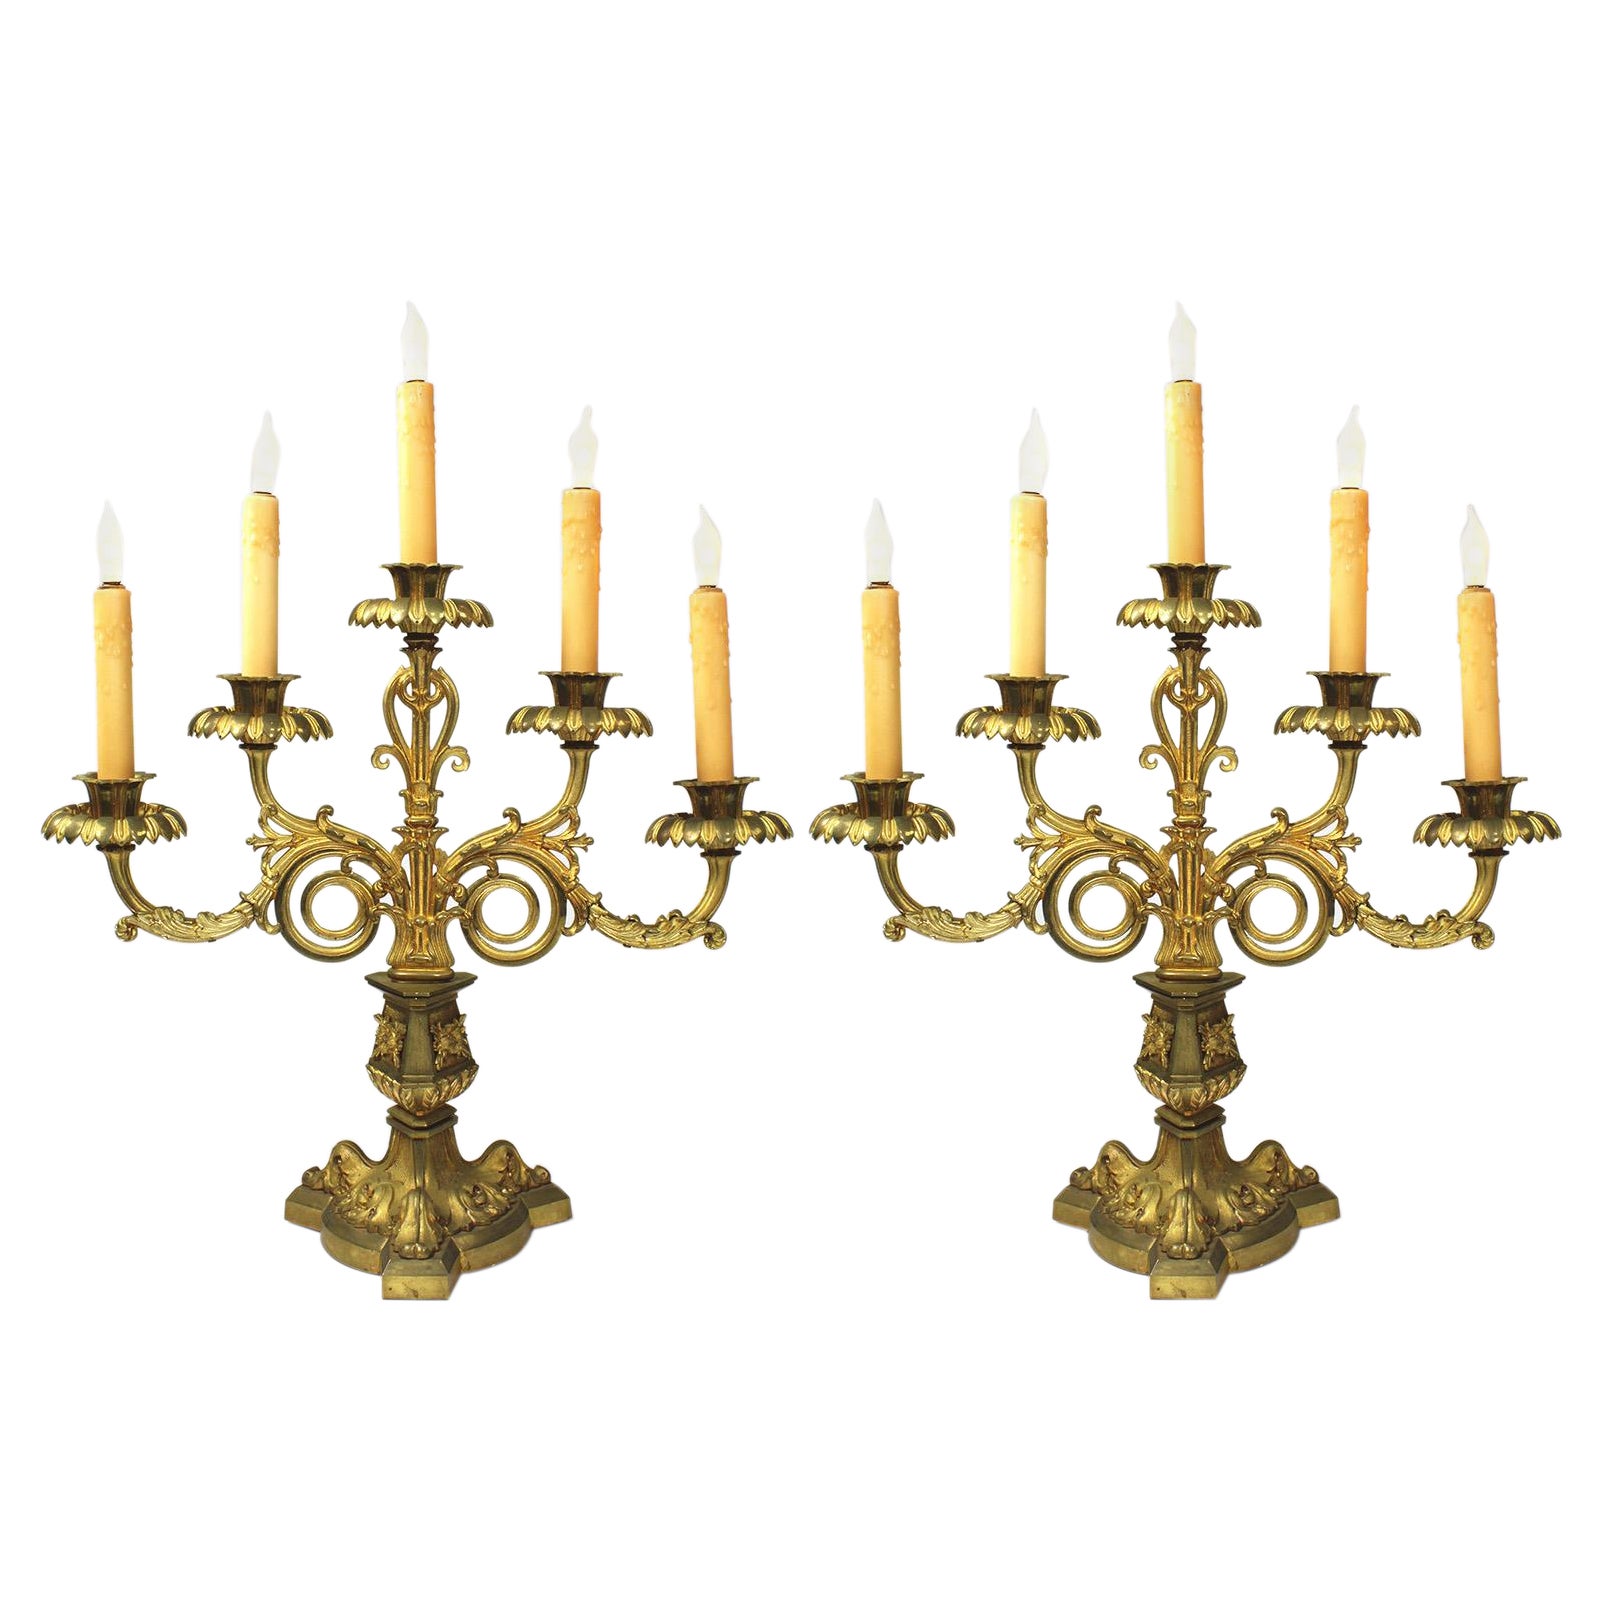 Pr. French 19th Century Gothic-Neoclassical Style 5-Light Gilt-Bronze Candelabra For Sale